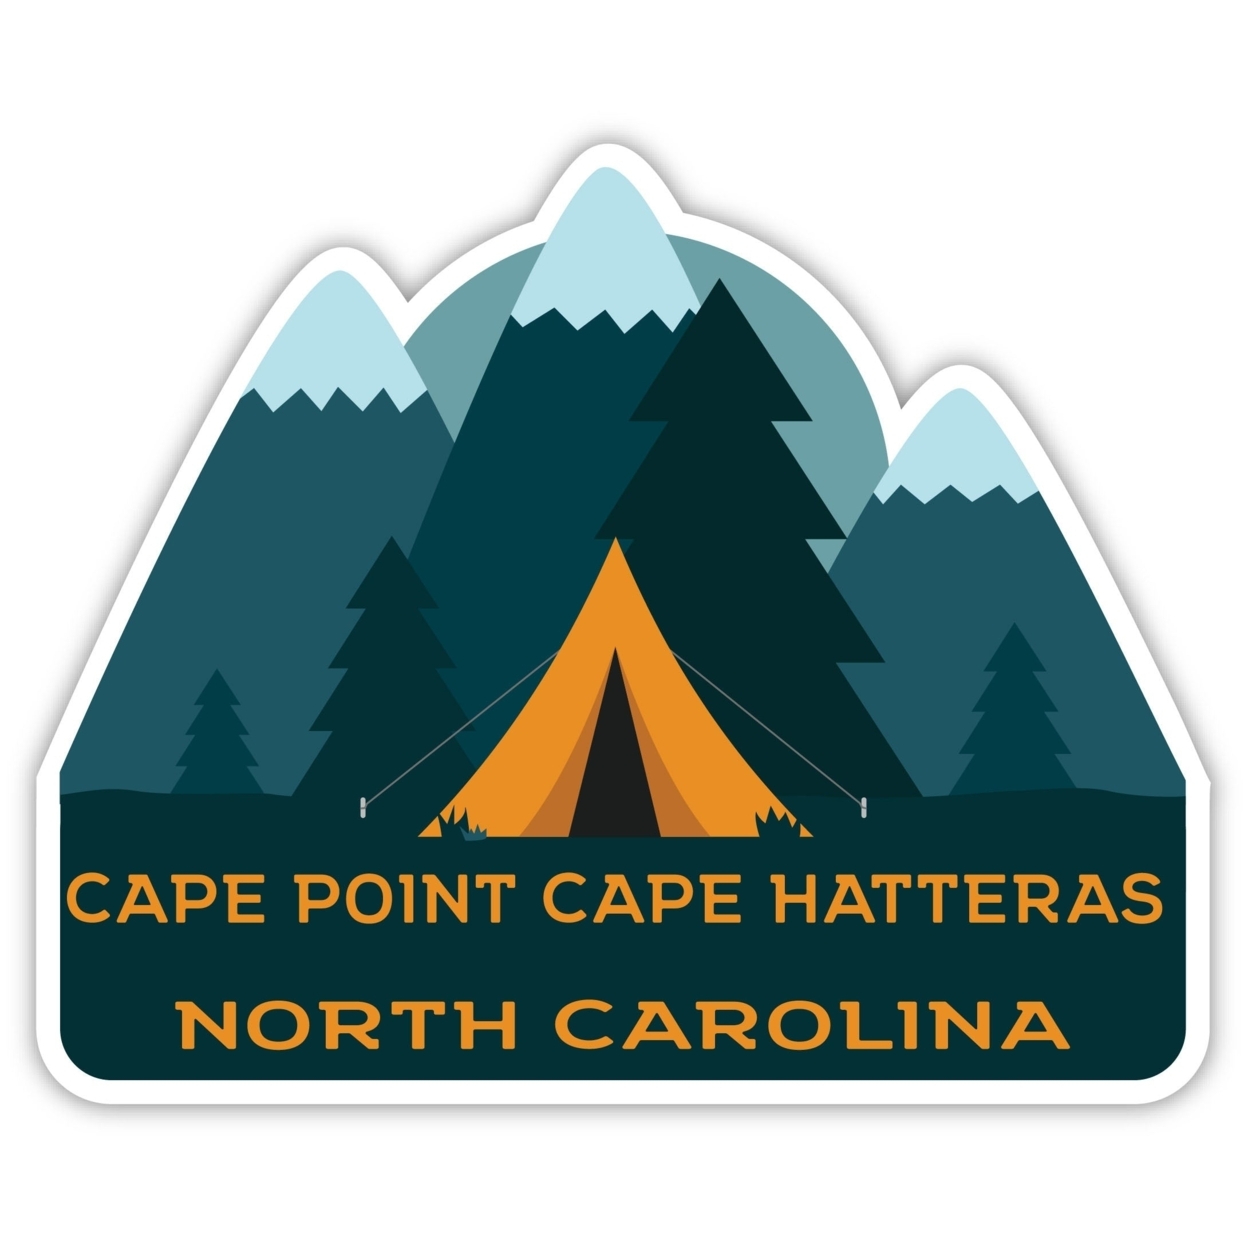 Cape Point Cape Hatteras North Carolina Souvenir Decorative Stickers (Choose Theme And Size) - 4-Pack, 12-Inch, Tent